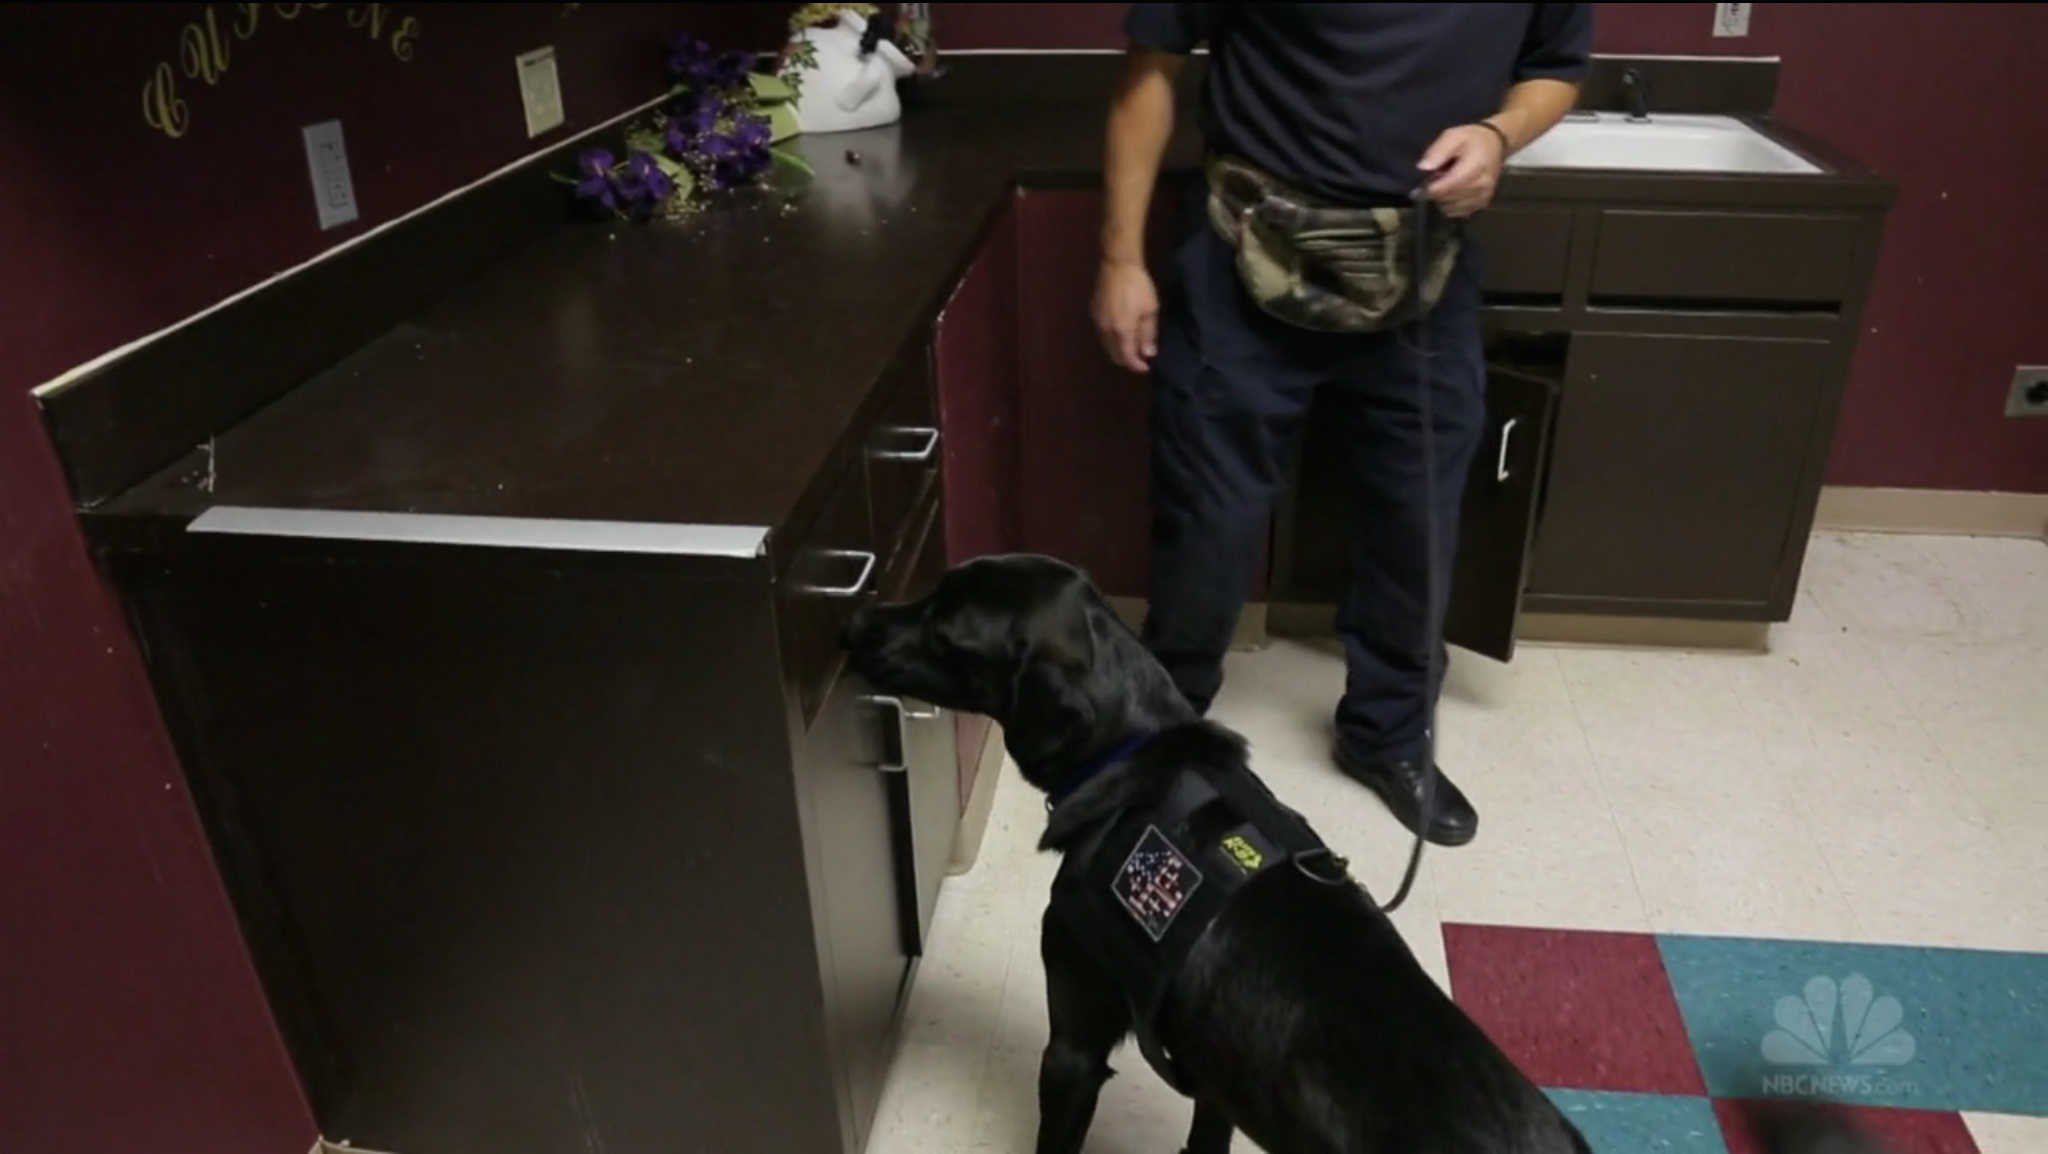 Bear is one of five electronics-sniffing dogs